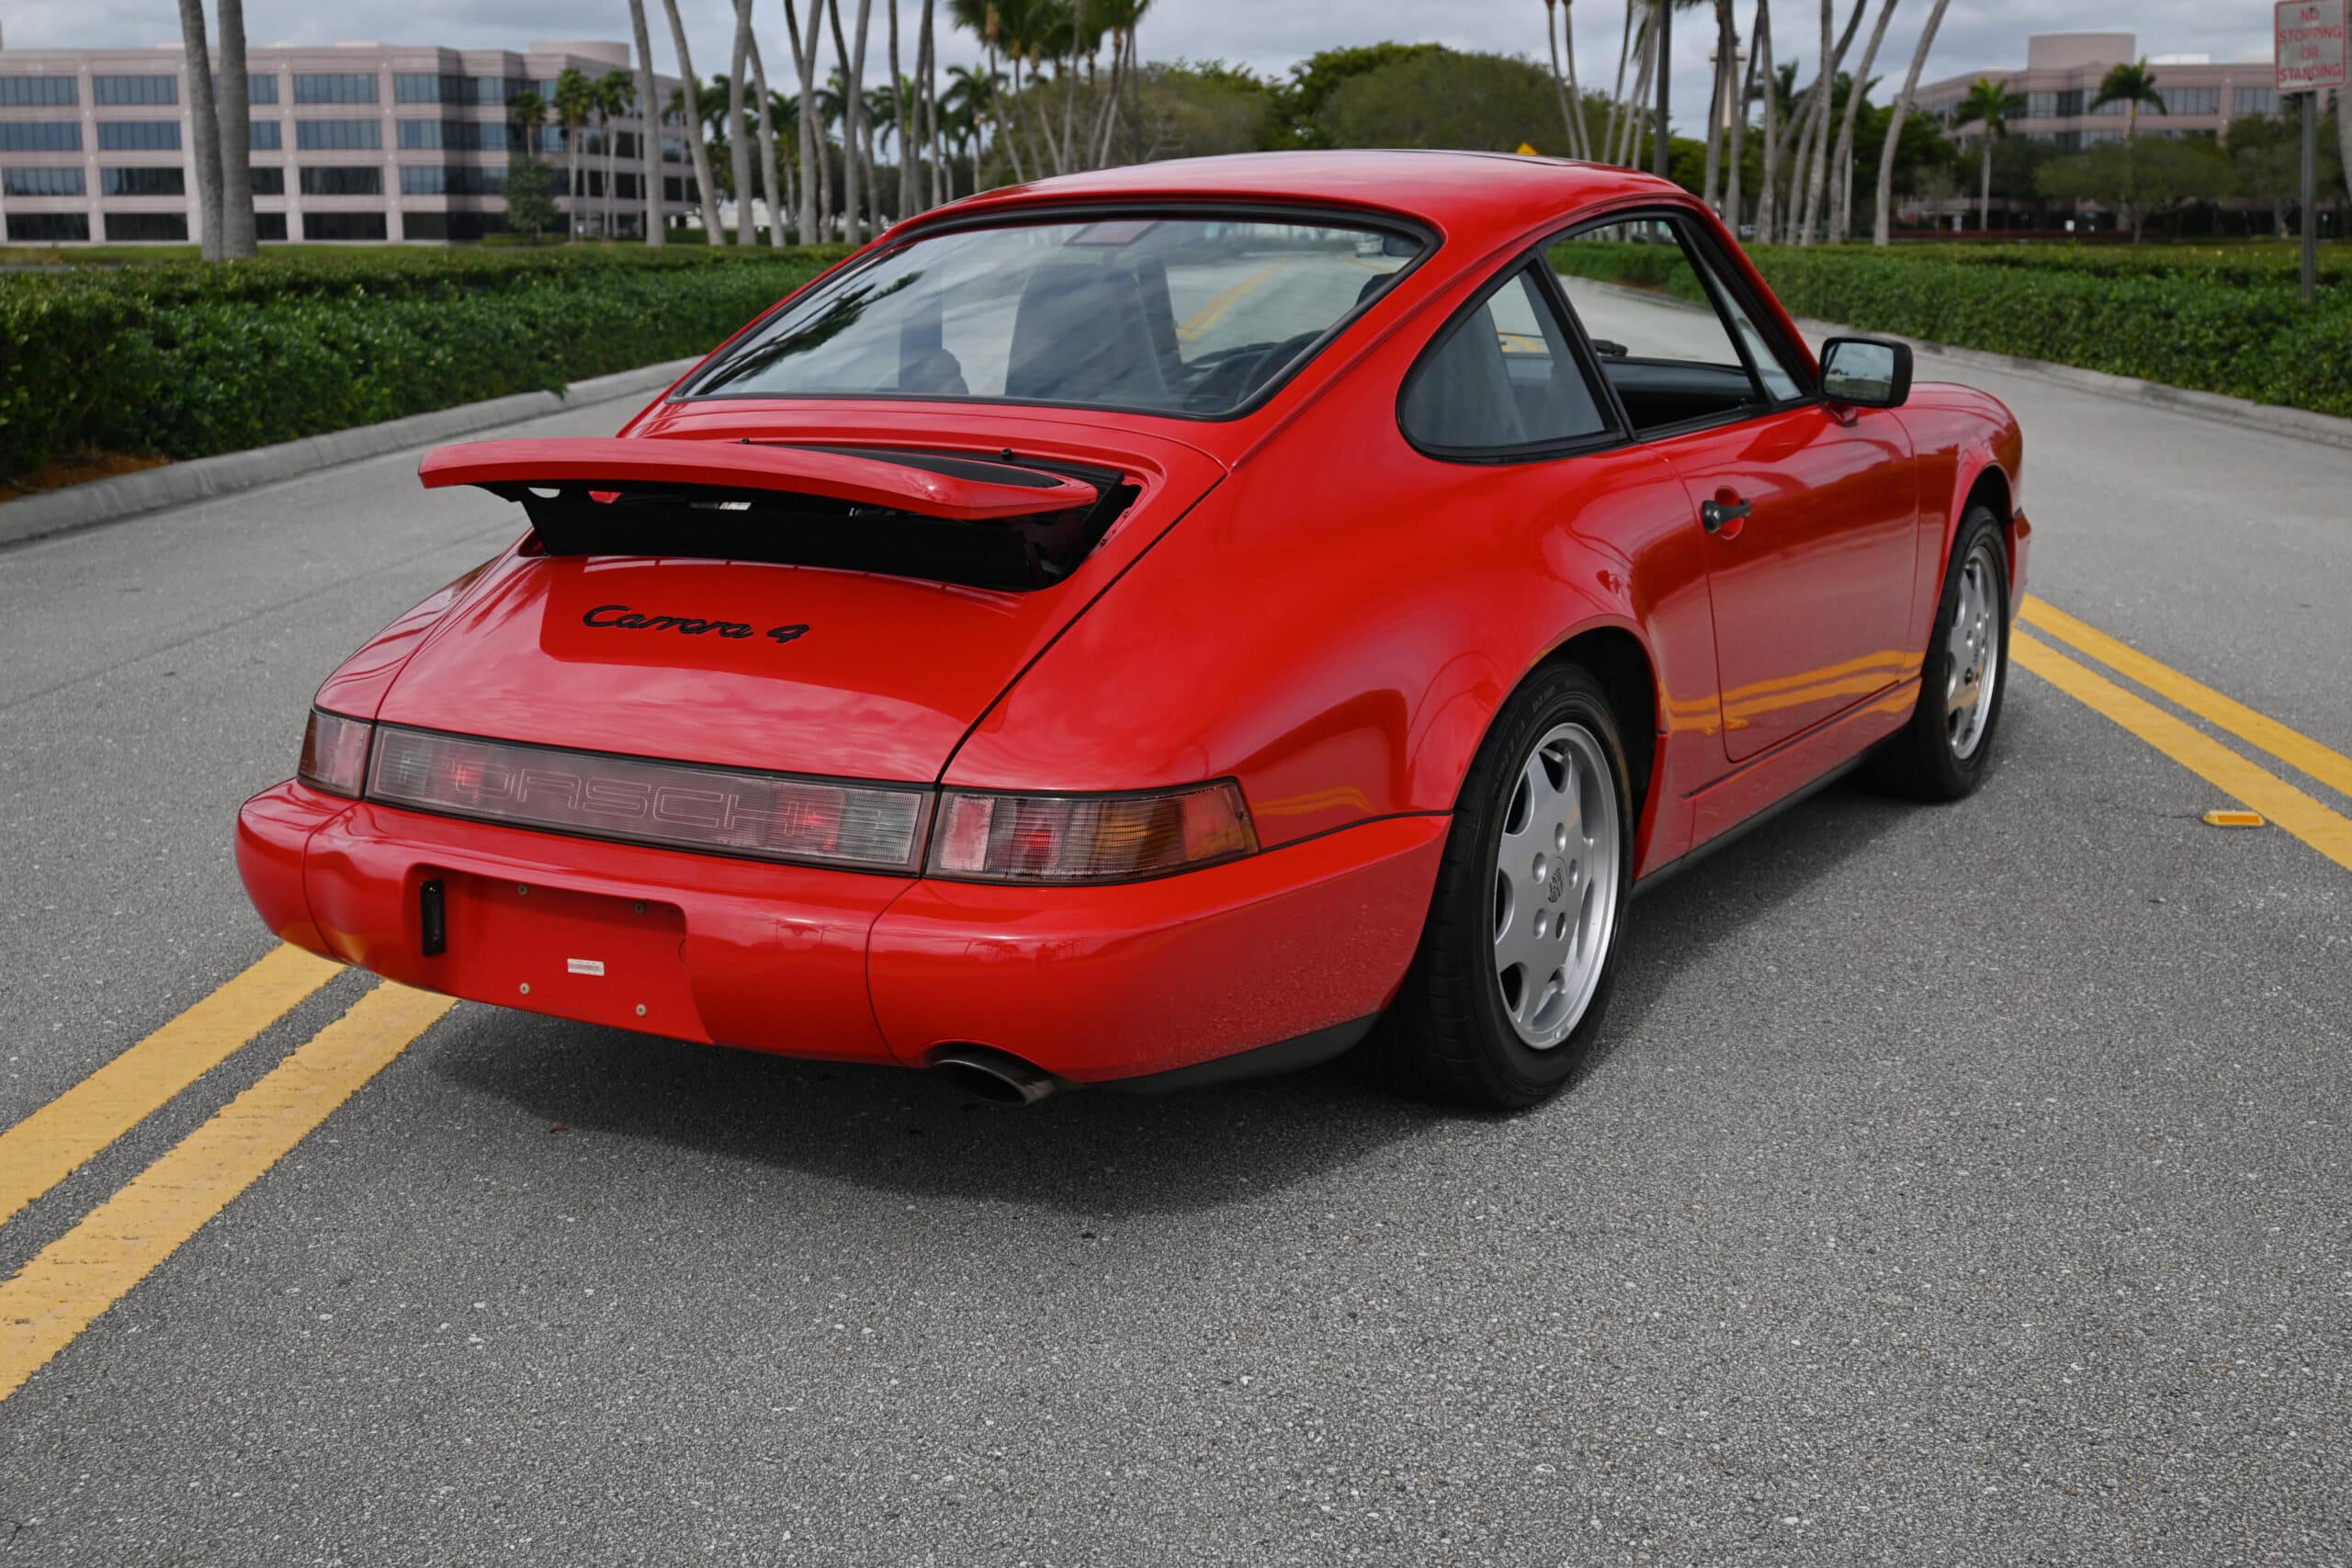 1989 964 Carrera 4, low miles, Original Paint and condition, documented service